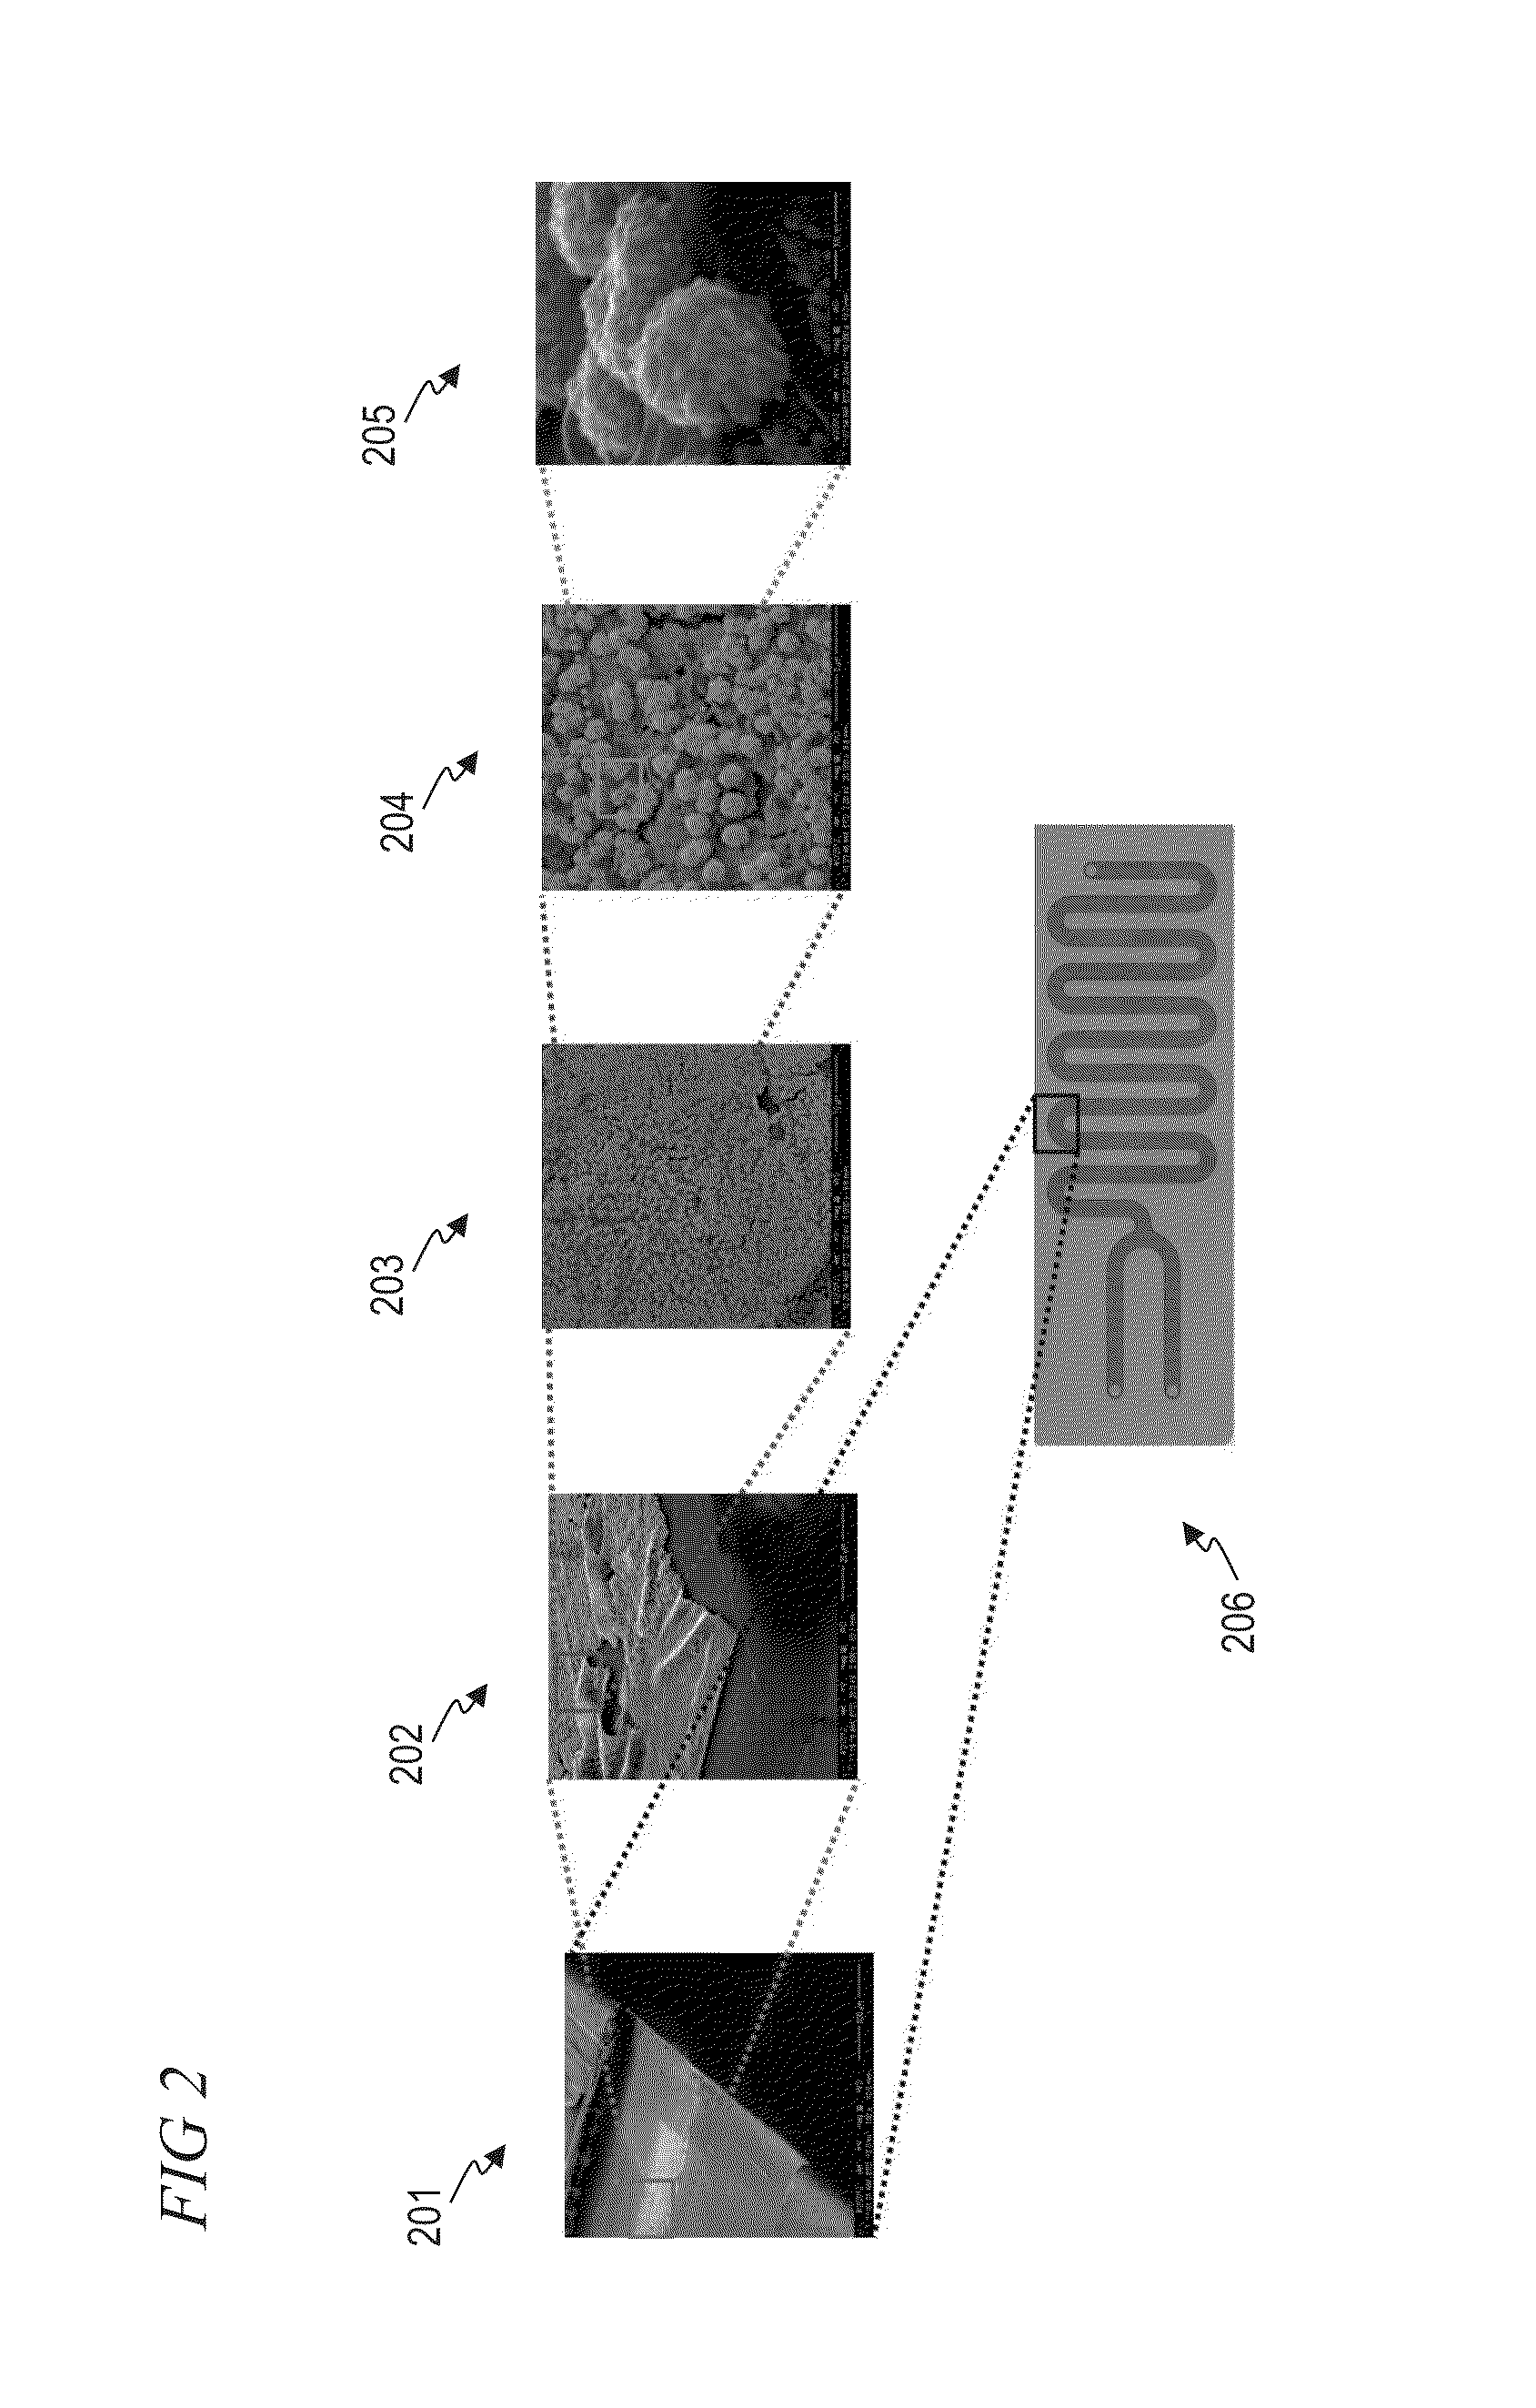 Fluidic channel coated with metal catalysts and devices and methods relating thereto